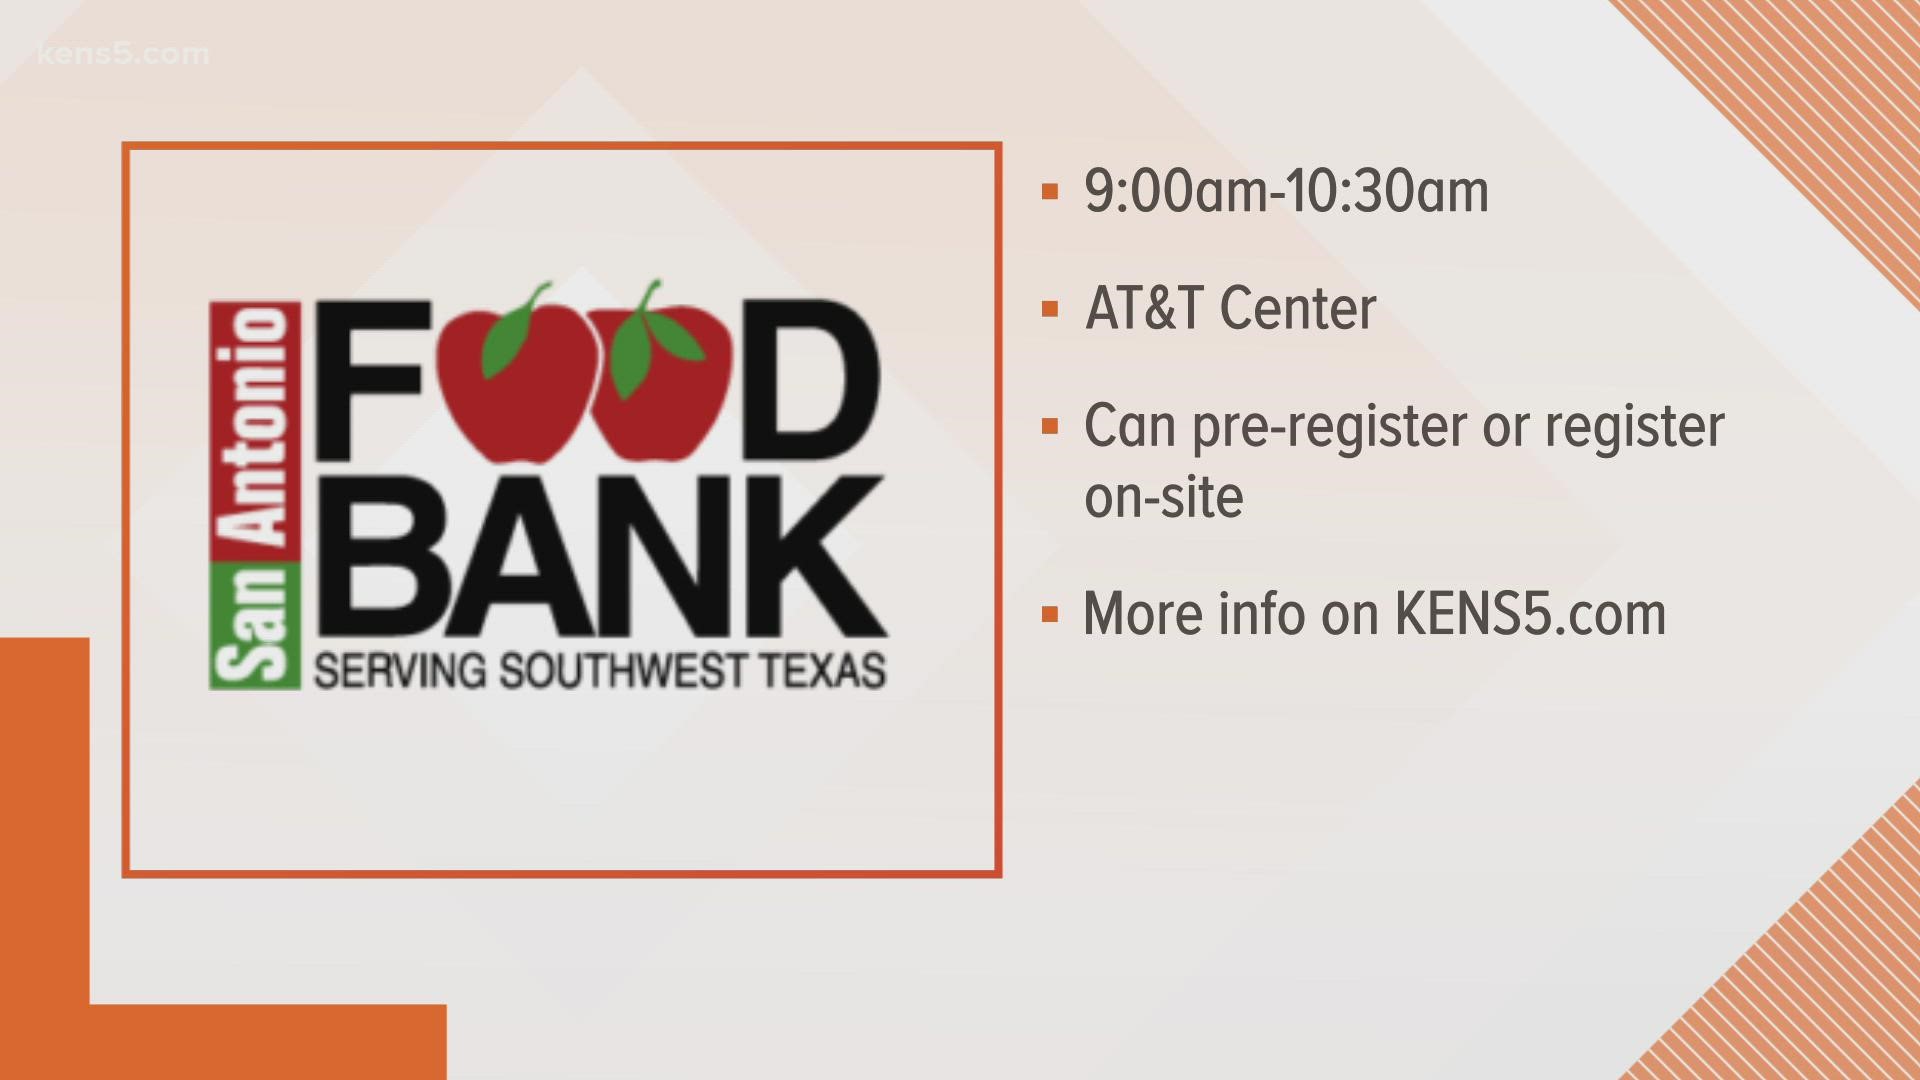 There will be other distribution events held on Saturdays. For more information, visit kens5.com.